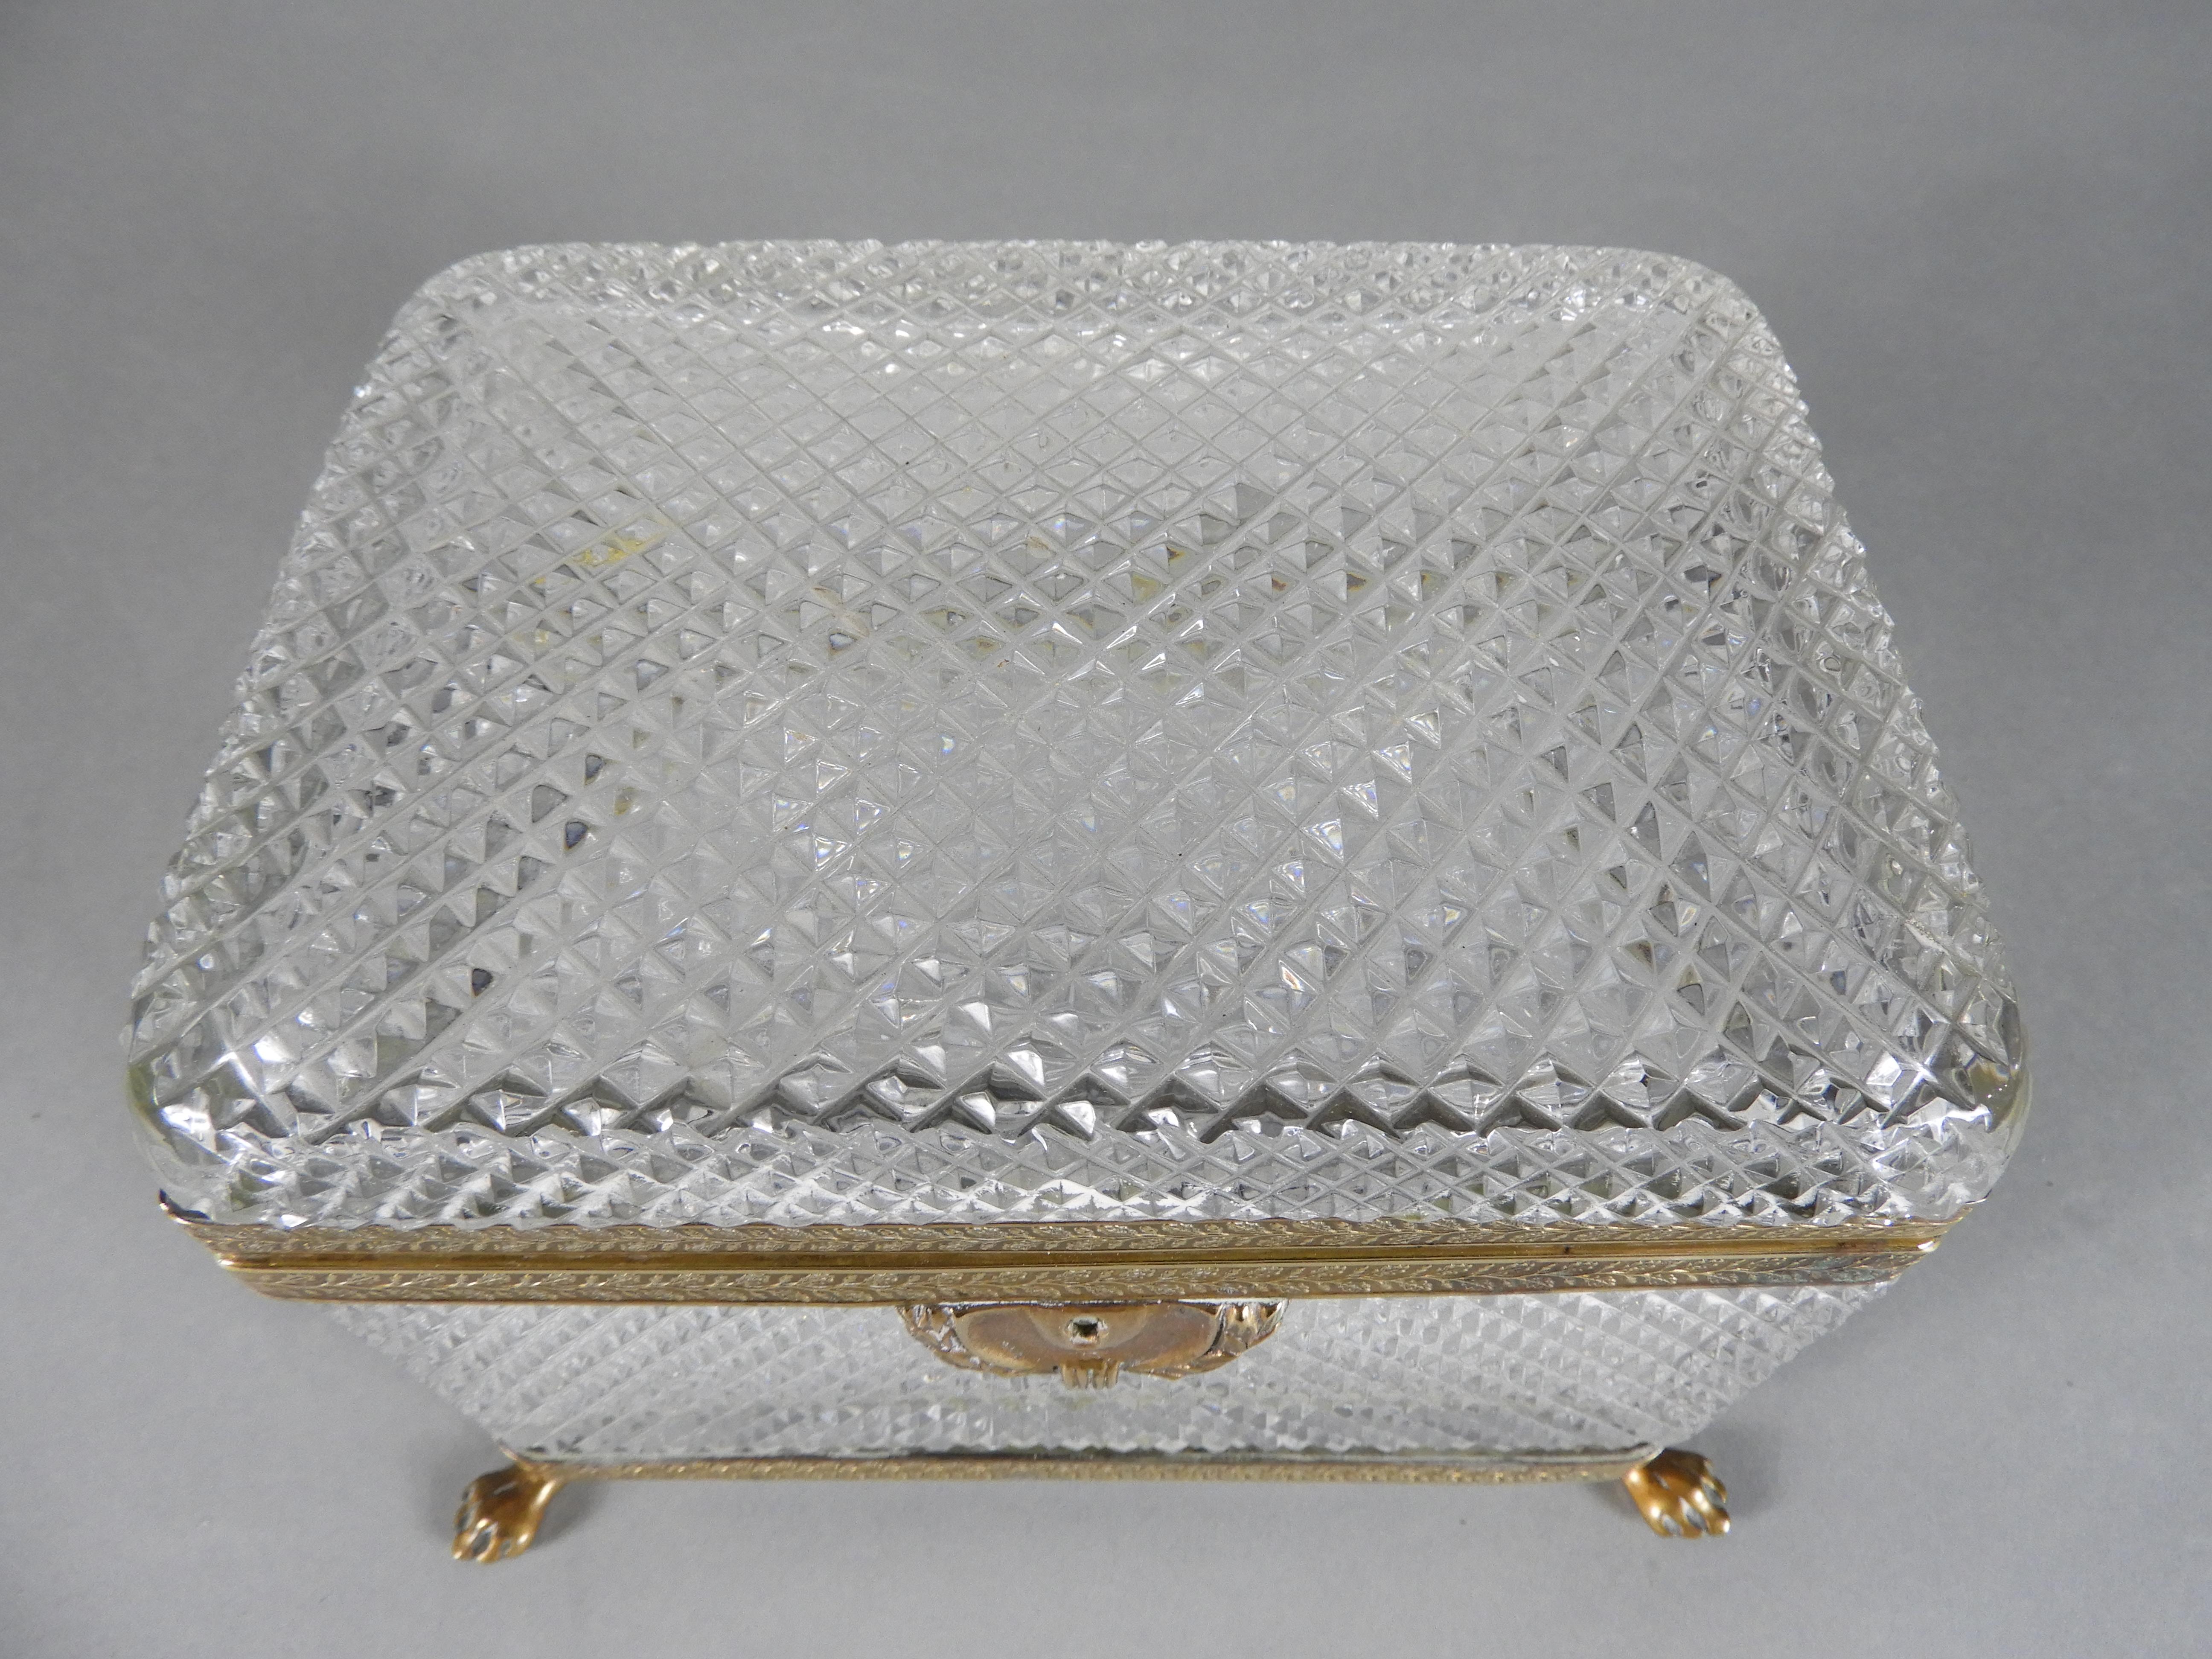 Hand-Crafted Antique French Cut Lead Crystal Casket